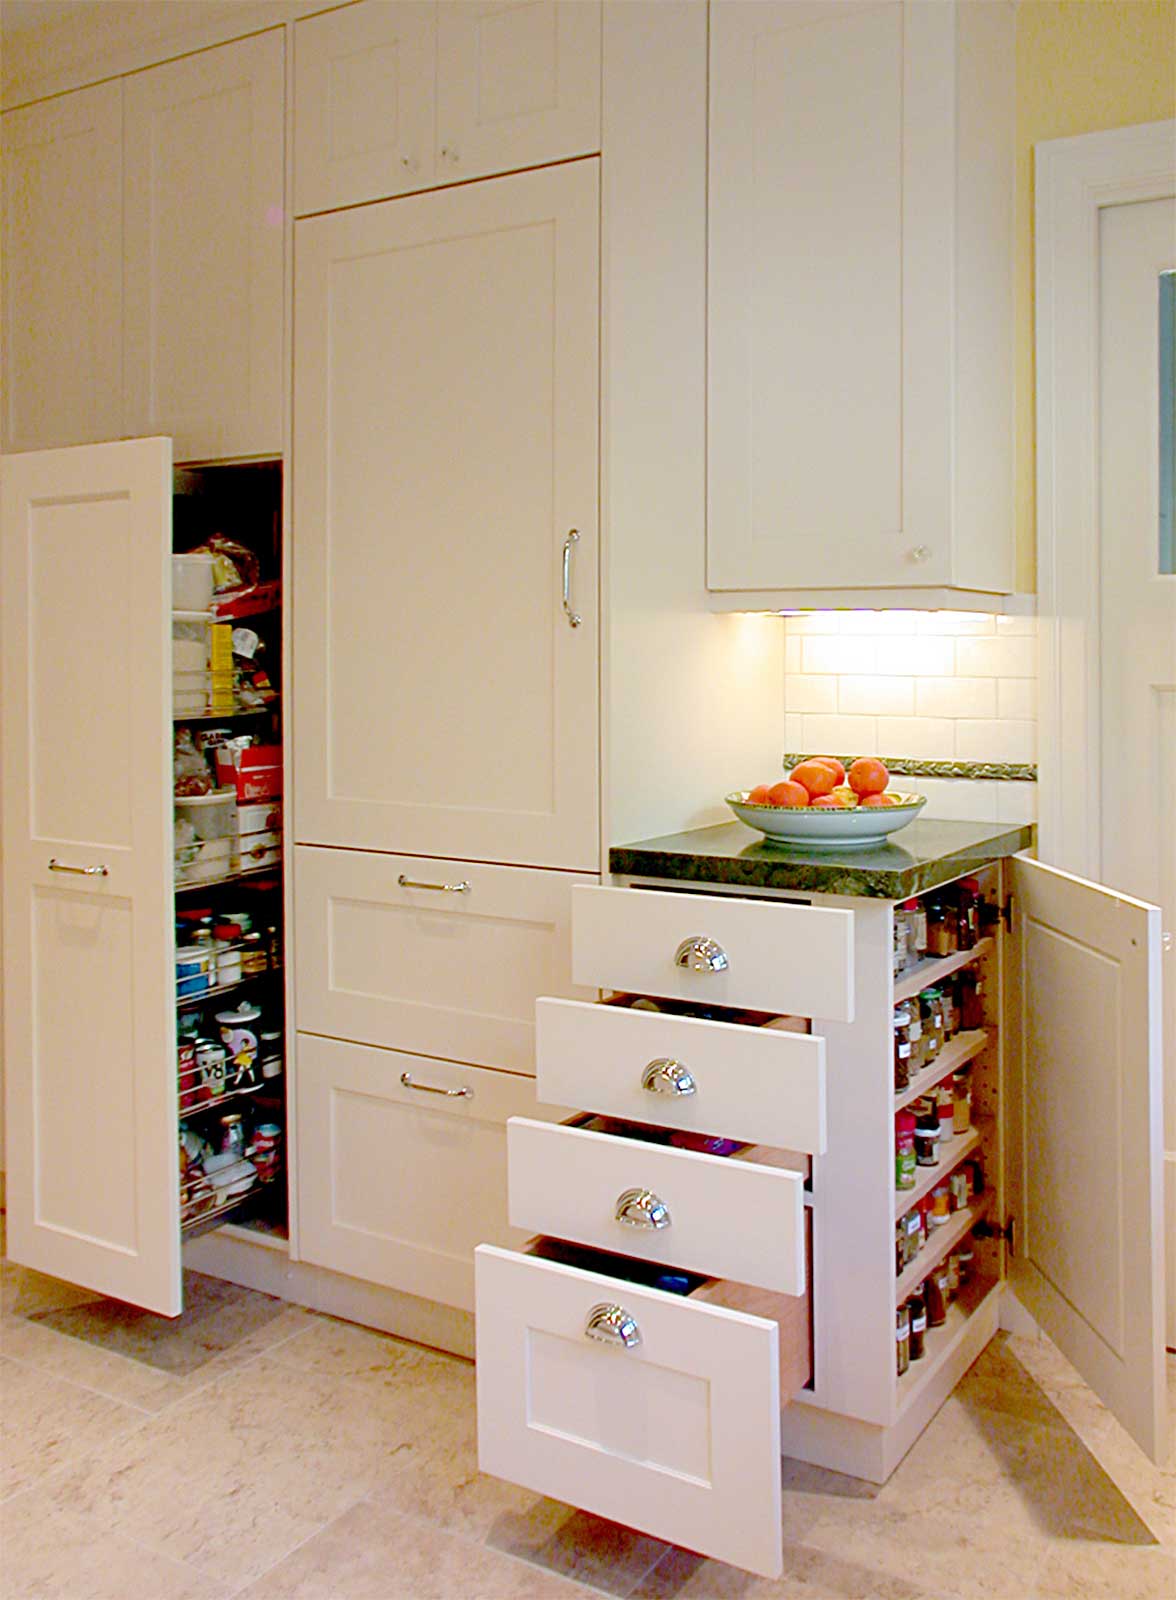 Pull-Out Storage Options to Consider for Your Kitchen